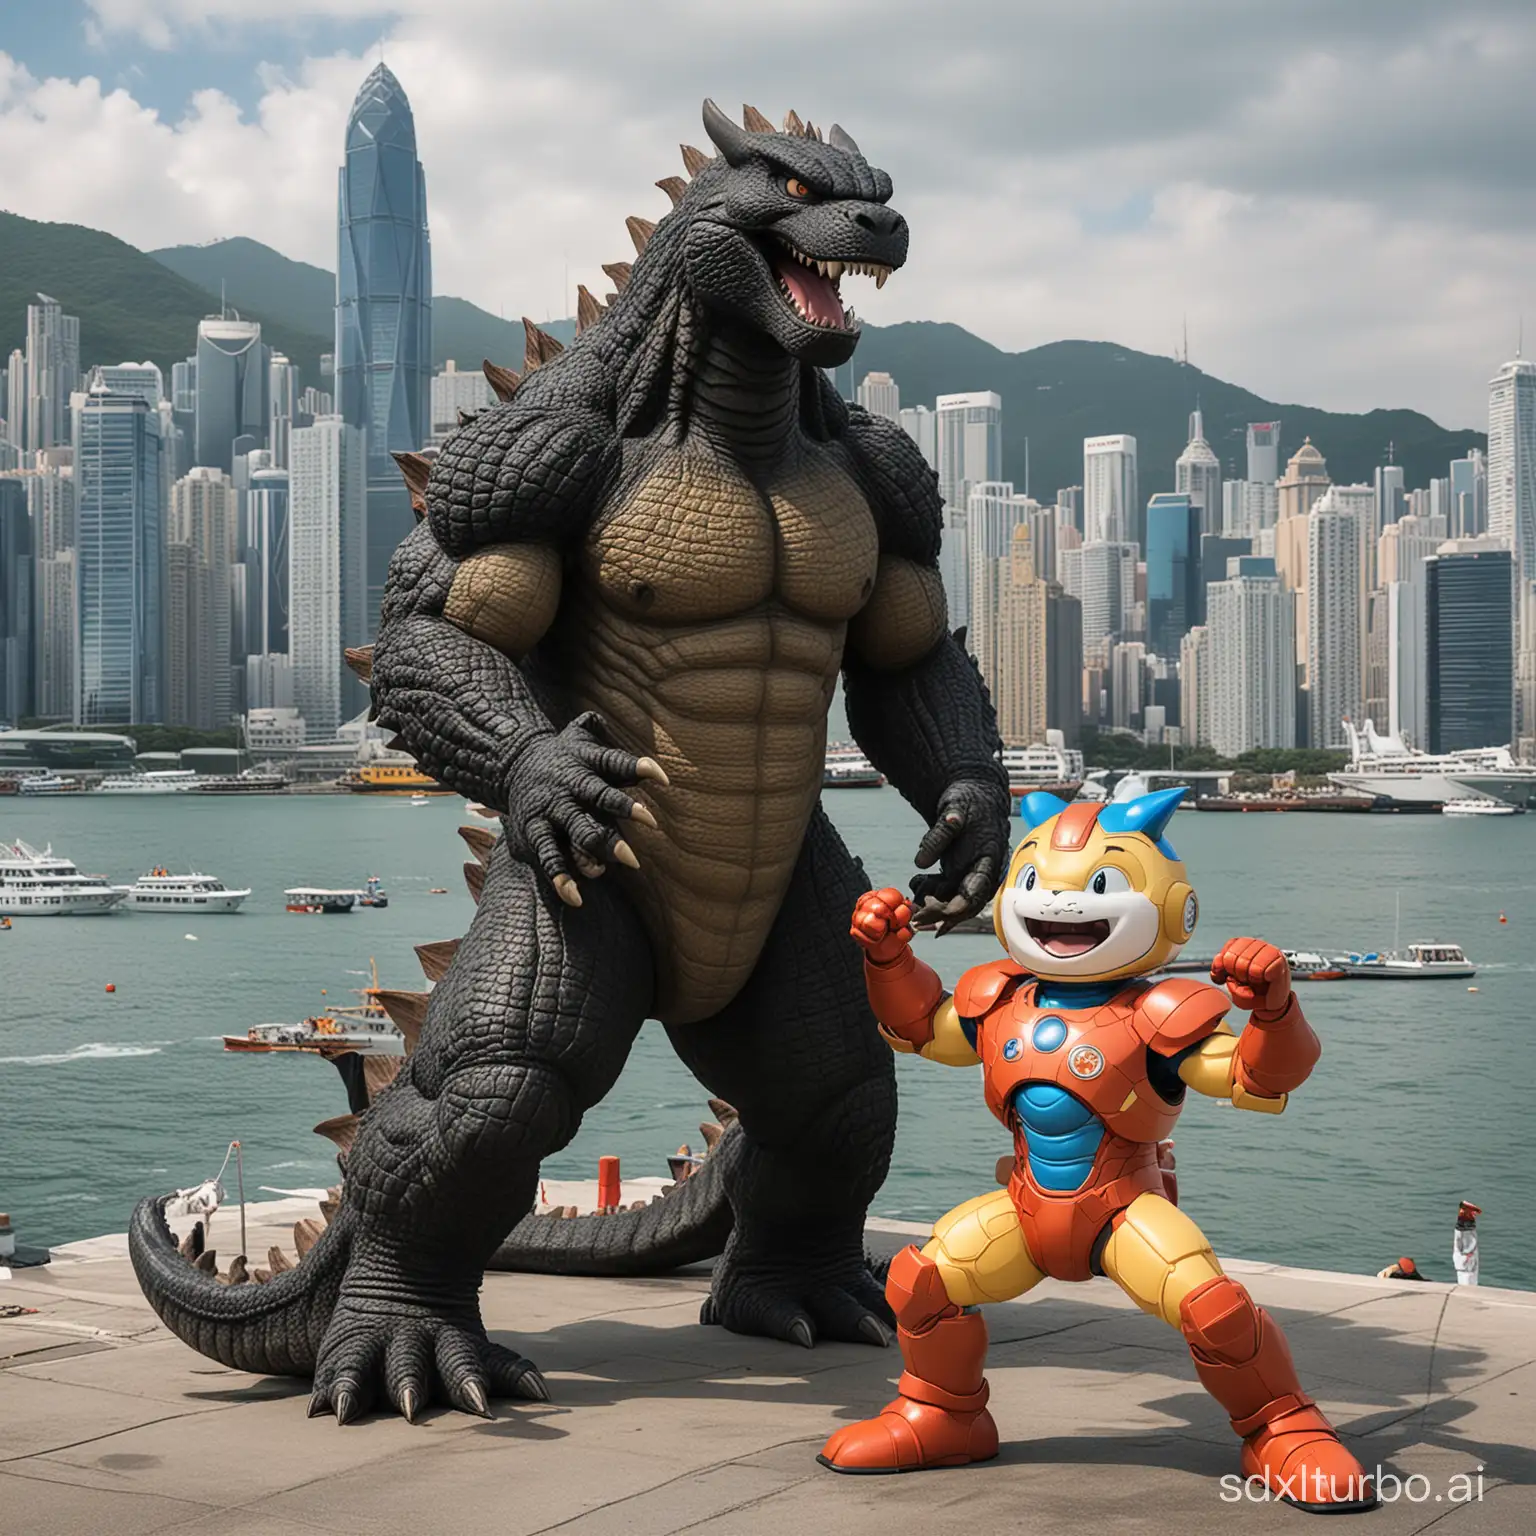 Godzilla and Iron Man wrestle at Victoria Harbour in Hong Kong, with Doraemon, Dora, and other protagonists cheering on the sidelines, Dragon Ball protagonist Son Goku serves as the referee, and Phil as Godzilla's coach.